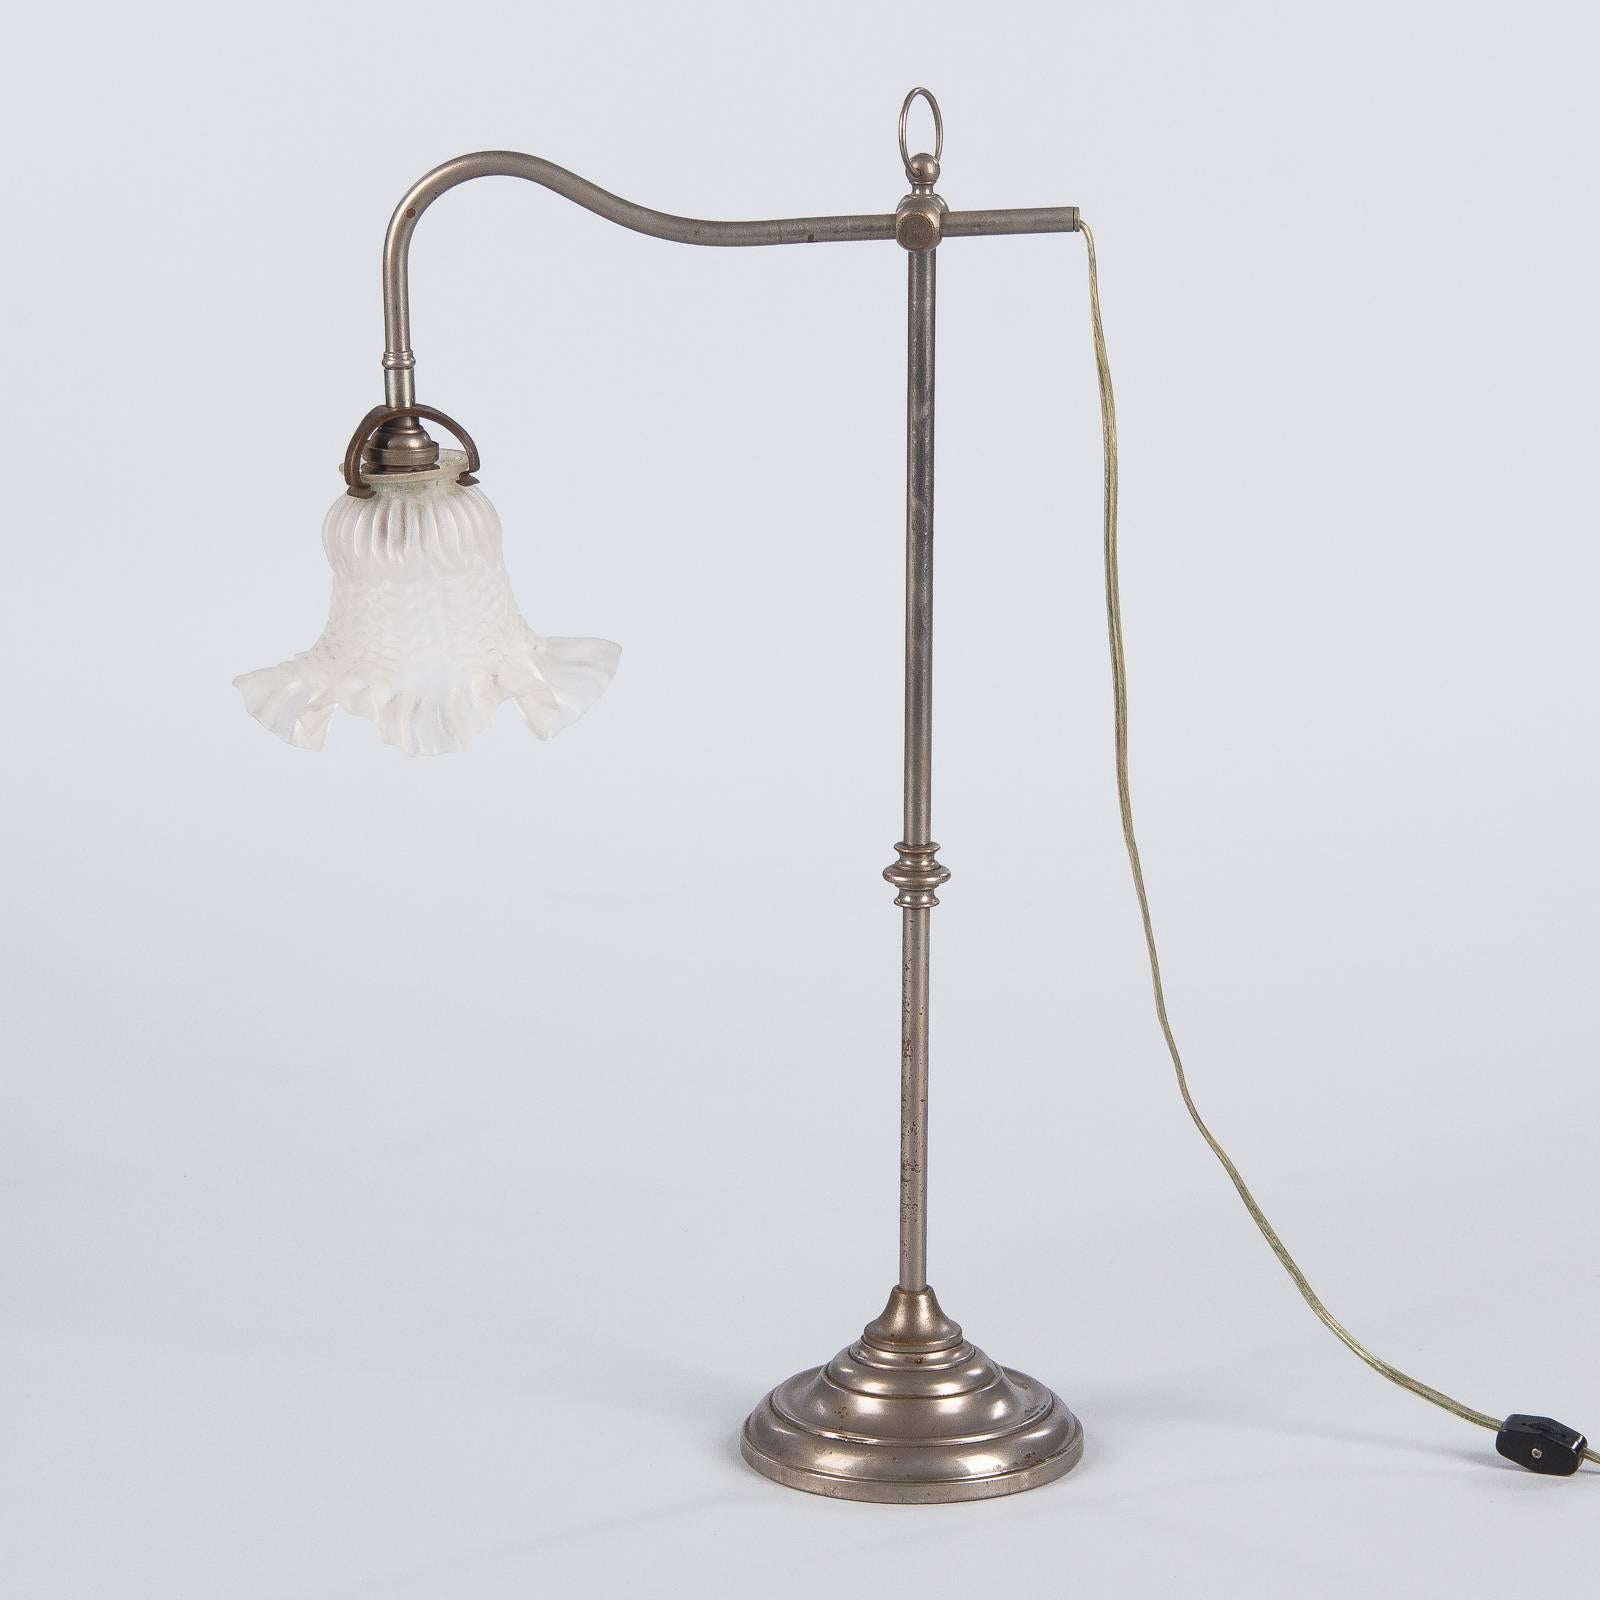 Frosted French Art Deco Silver Metal Desk Lamp with Glass Shade, 1930s